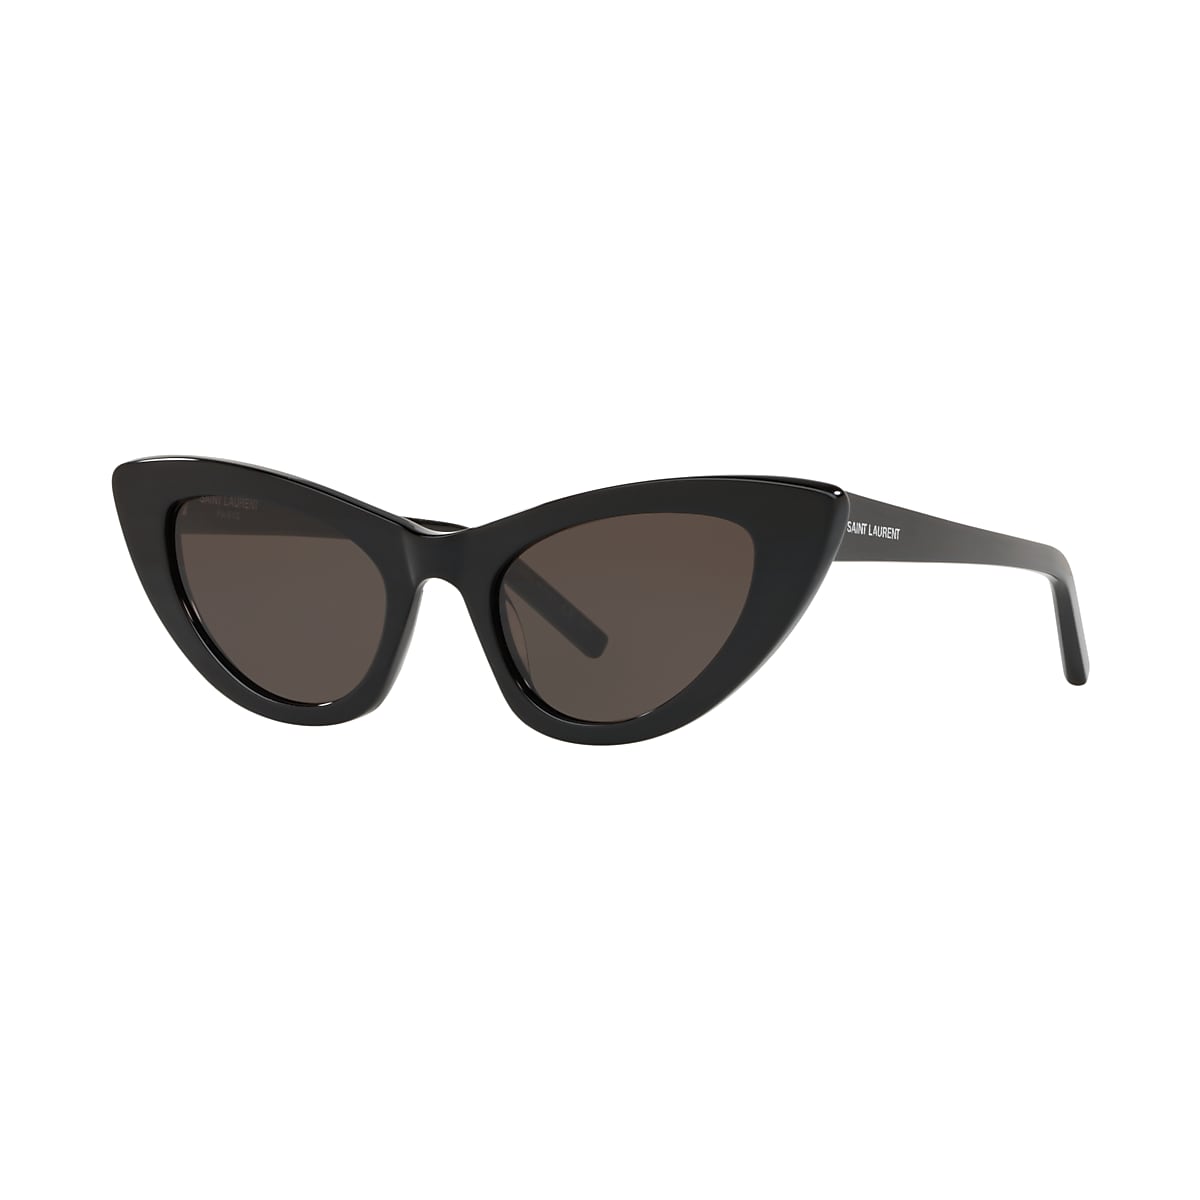 Yves Saint Laurent - New Wave SL 213 Lily Sunglasses with